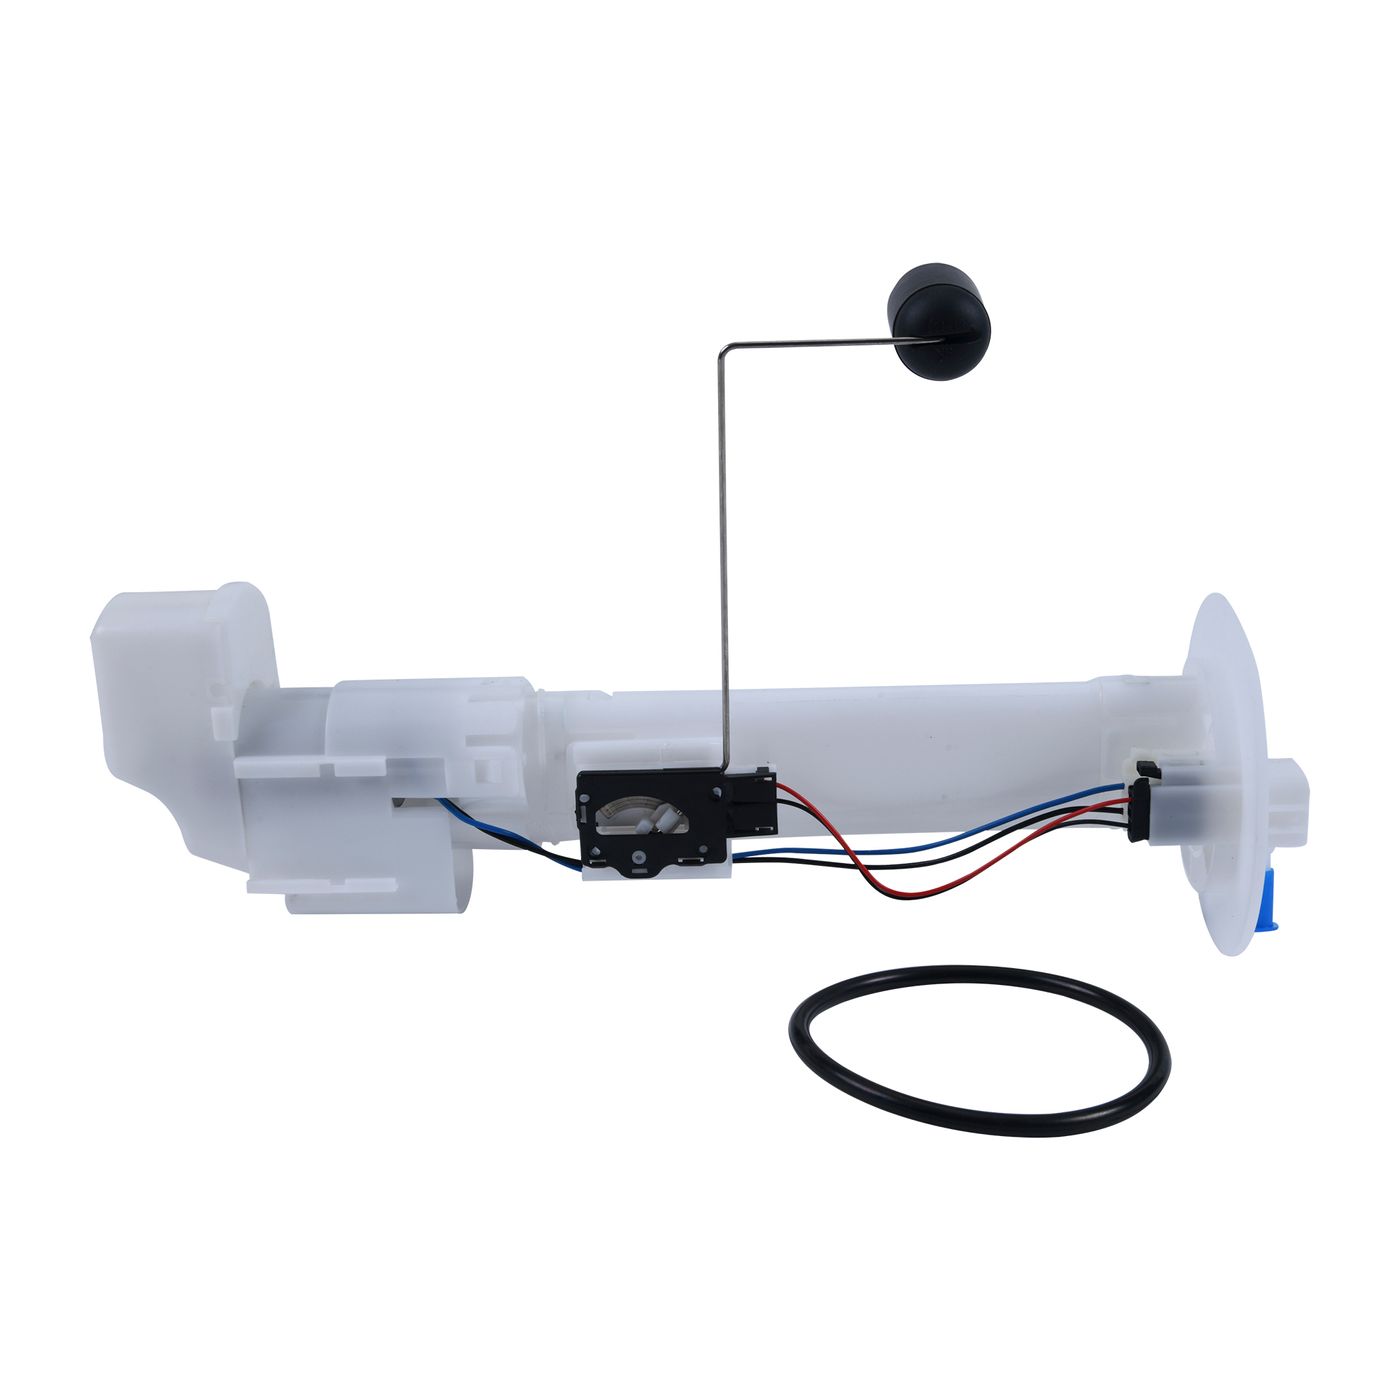 Wrp Fuel Pump Modules - WRP471031 image